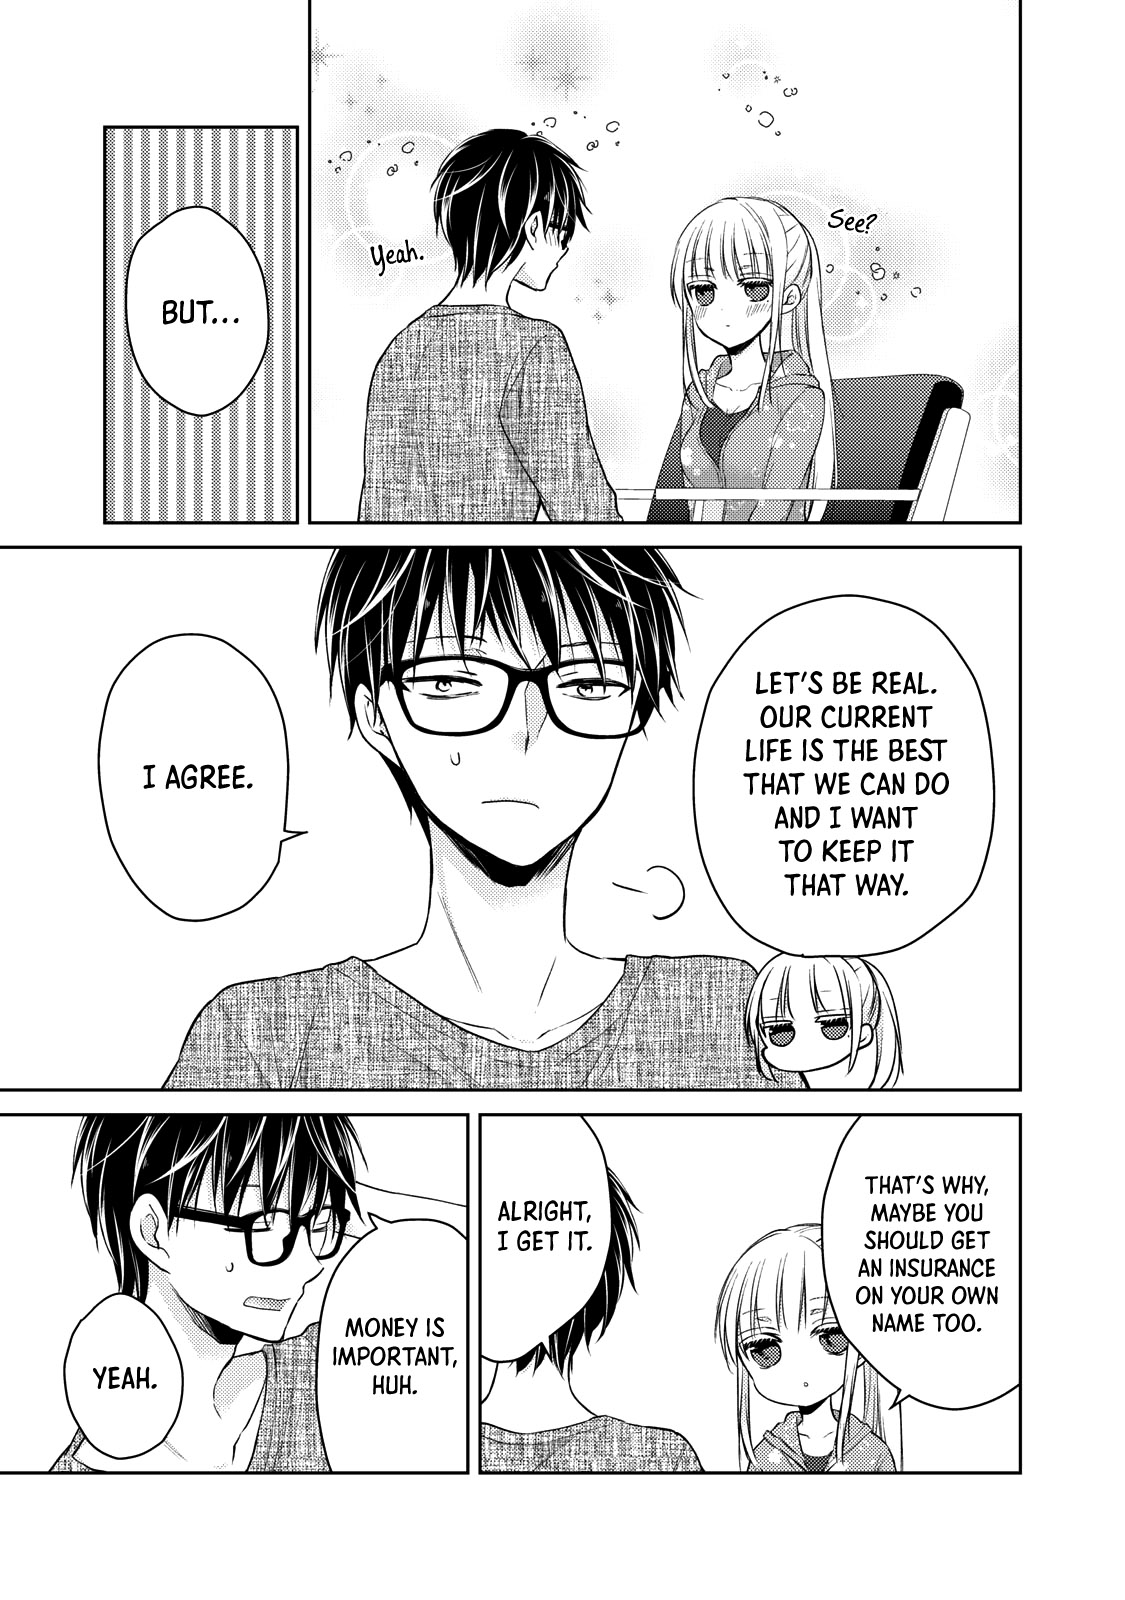 We May Be an Inexperienced Couple but... Ch. 41 Preperation for the Worst